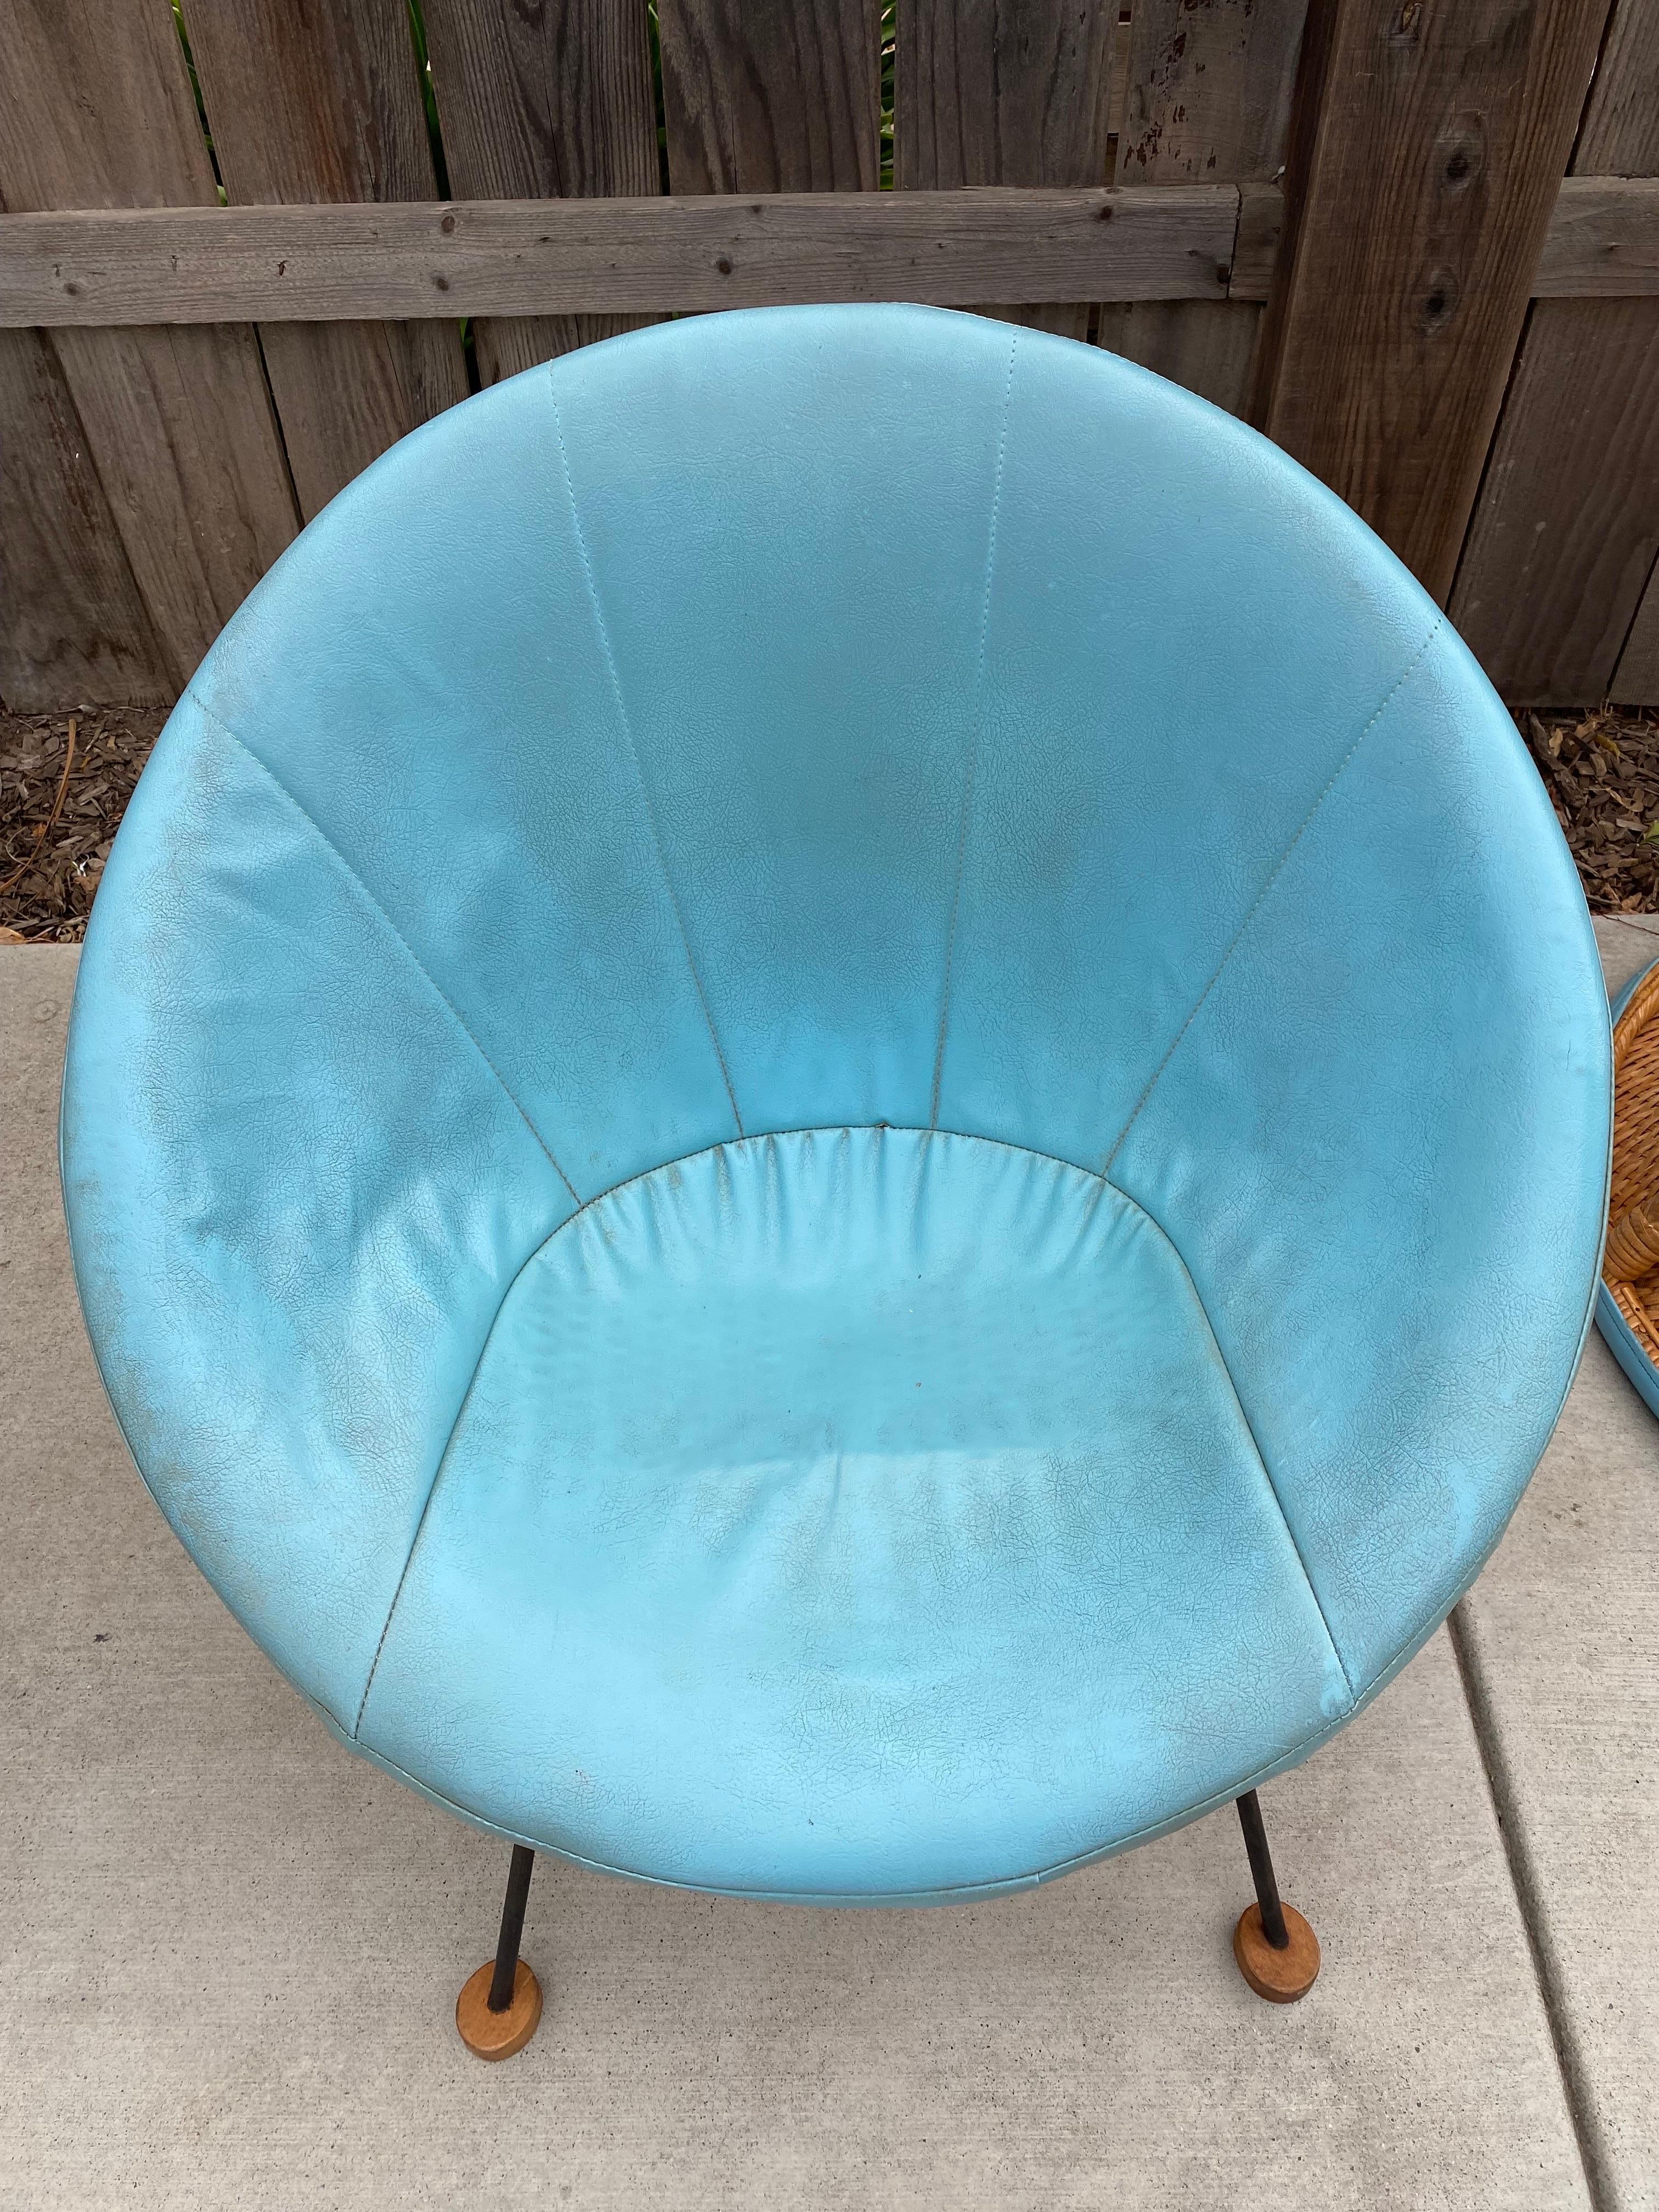 Mid-Century Modern Boho Chic Turquoise Rattan Scoop Chairs, a Pair For Sale 4